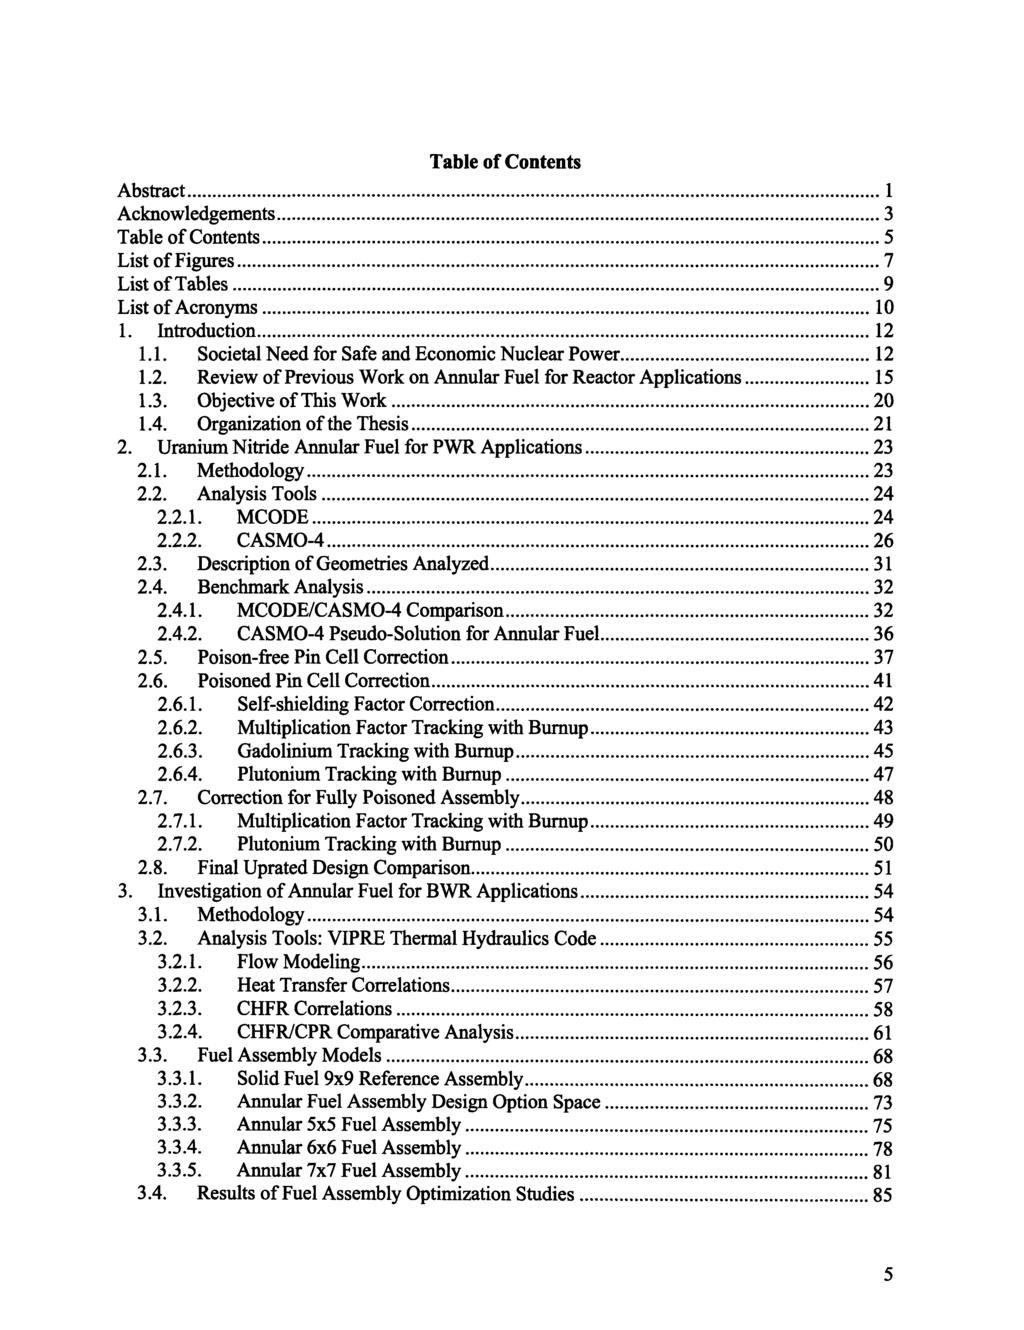 Table of Contents A bstract... 1 Acknowledgements... 3 Table of Contents... 5 List of Figures... 7 List of Tables... 9 List of Acronyms... 10 1. Introduction... 12 1.1. Societal Need for Safe and Economic Nuclear Power.